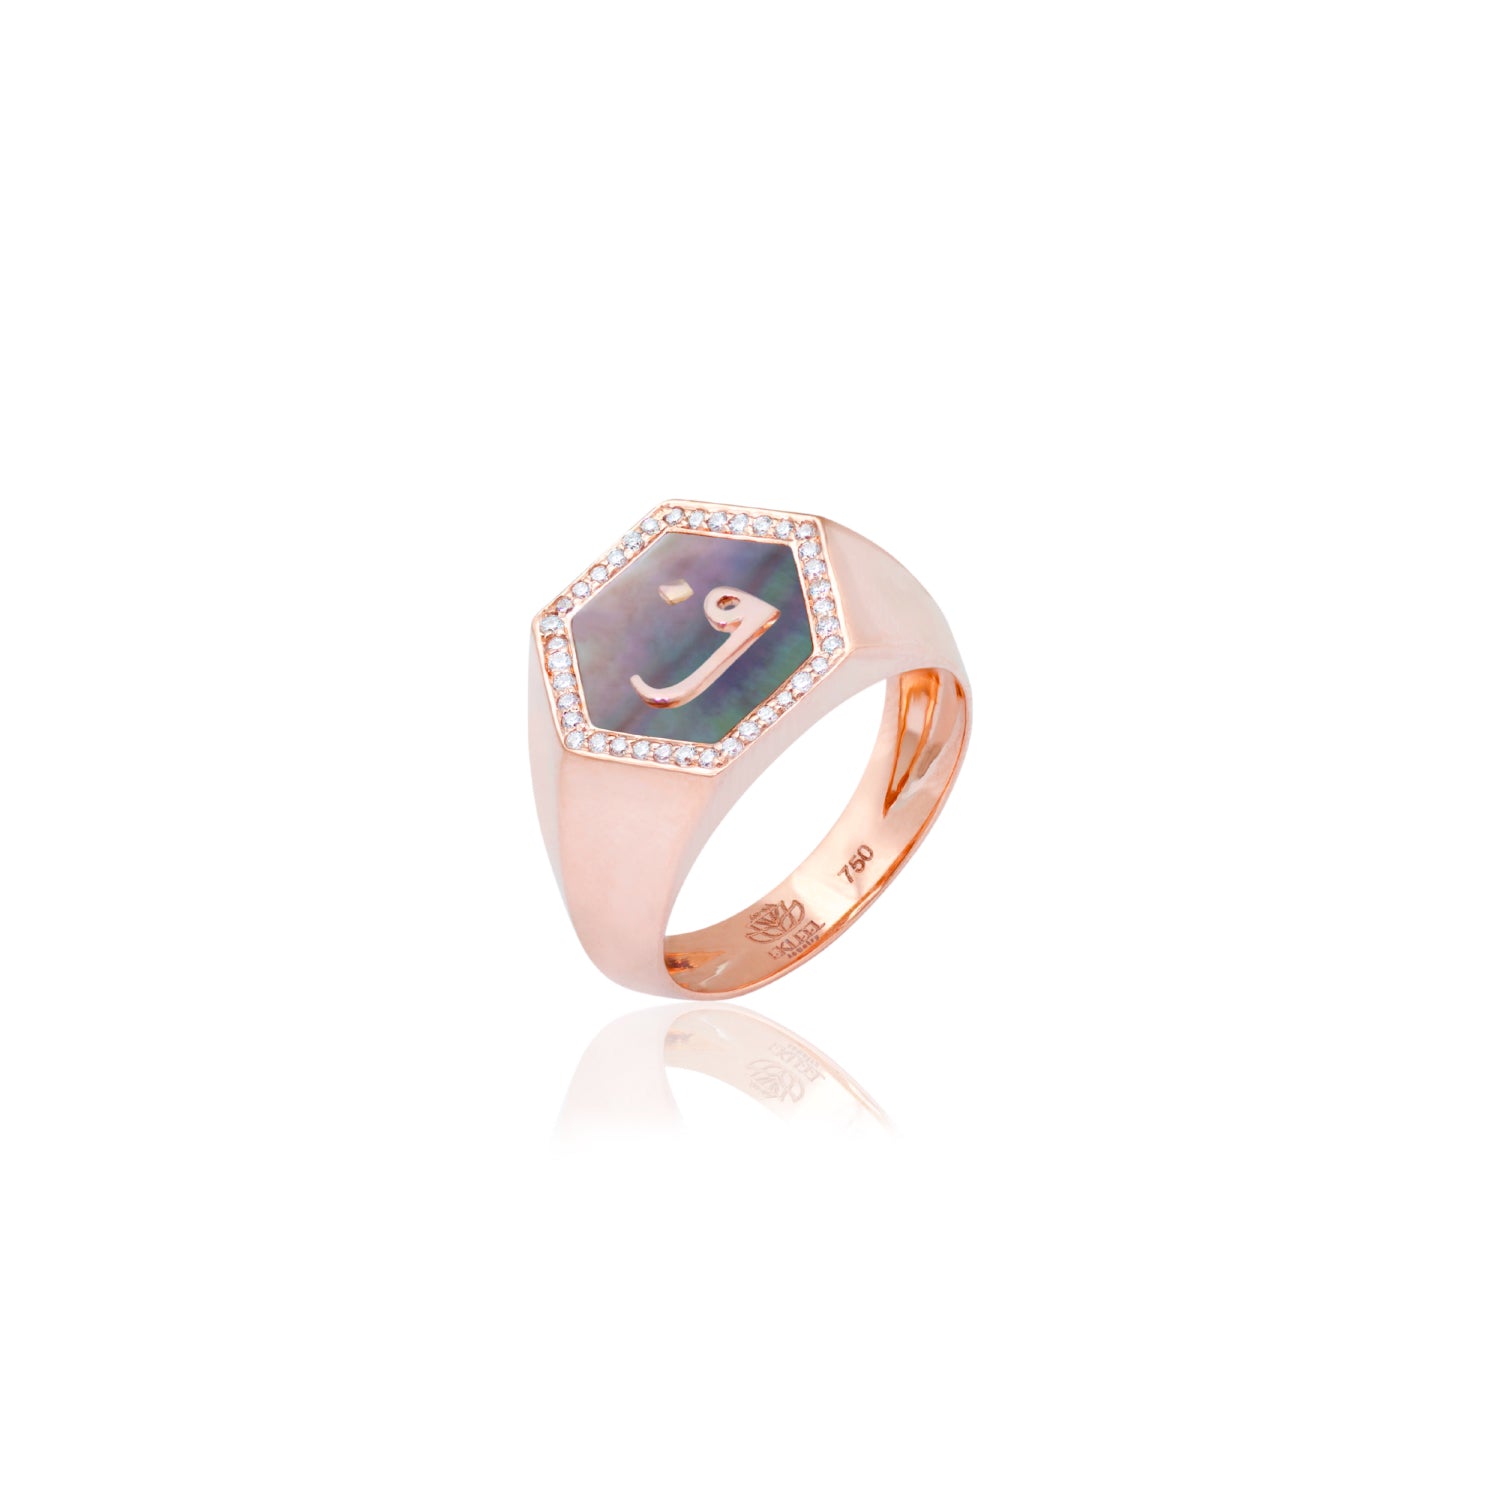 Qamoos 2.0 Letter ف Black Mother of Pearl and Diamond Signet Ring in Rose Gold